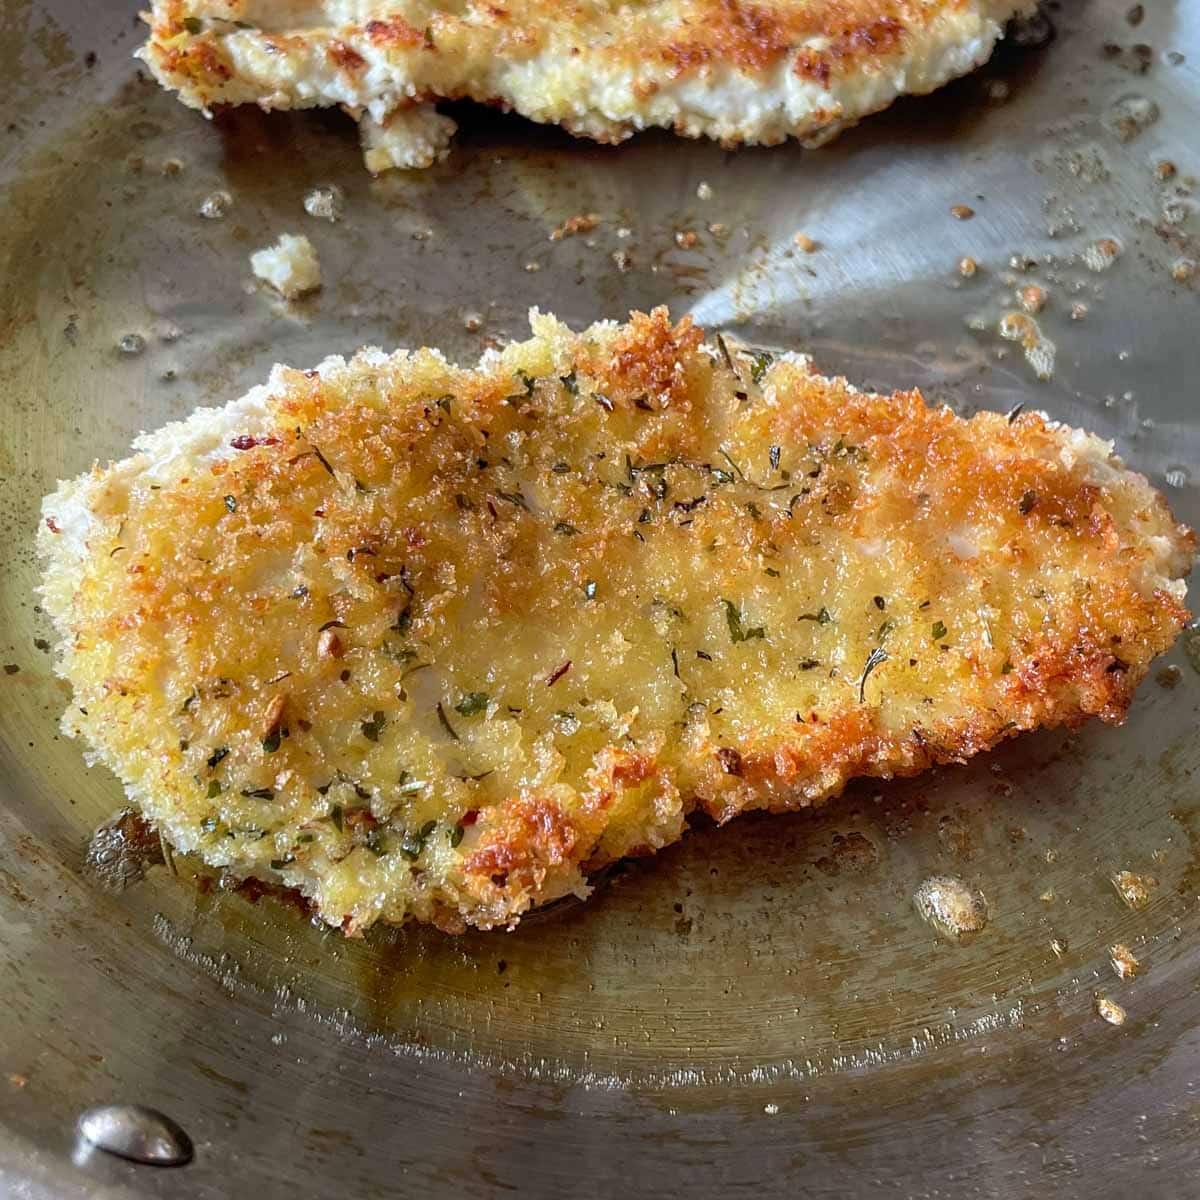 Fried, breaded chicken cutlet cooking in a stainless steel frying pan.